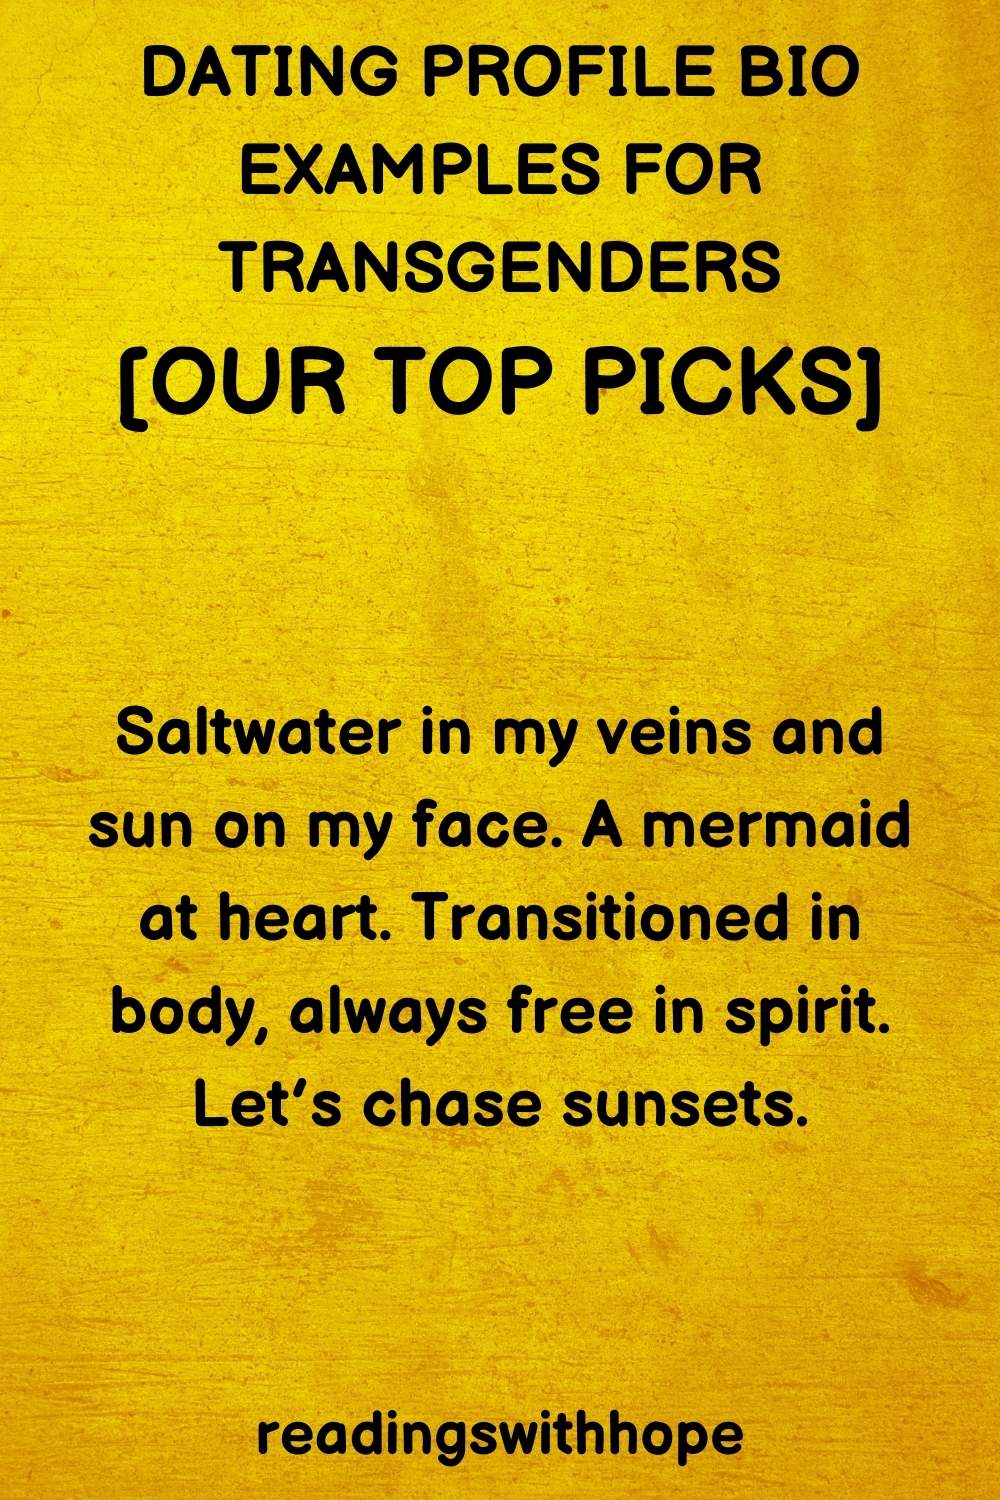 dating profile bio example for transgenders